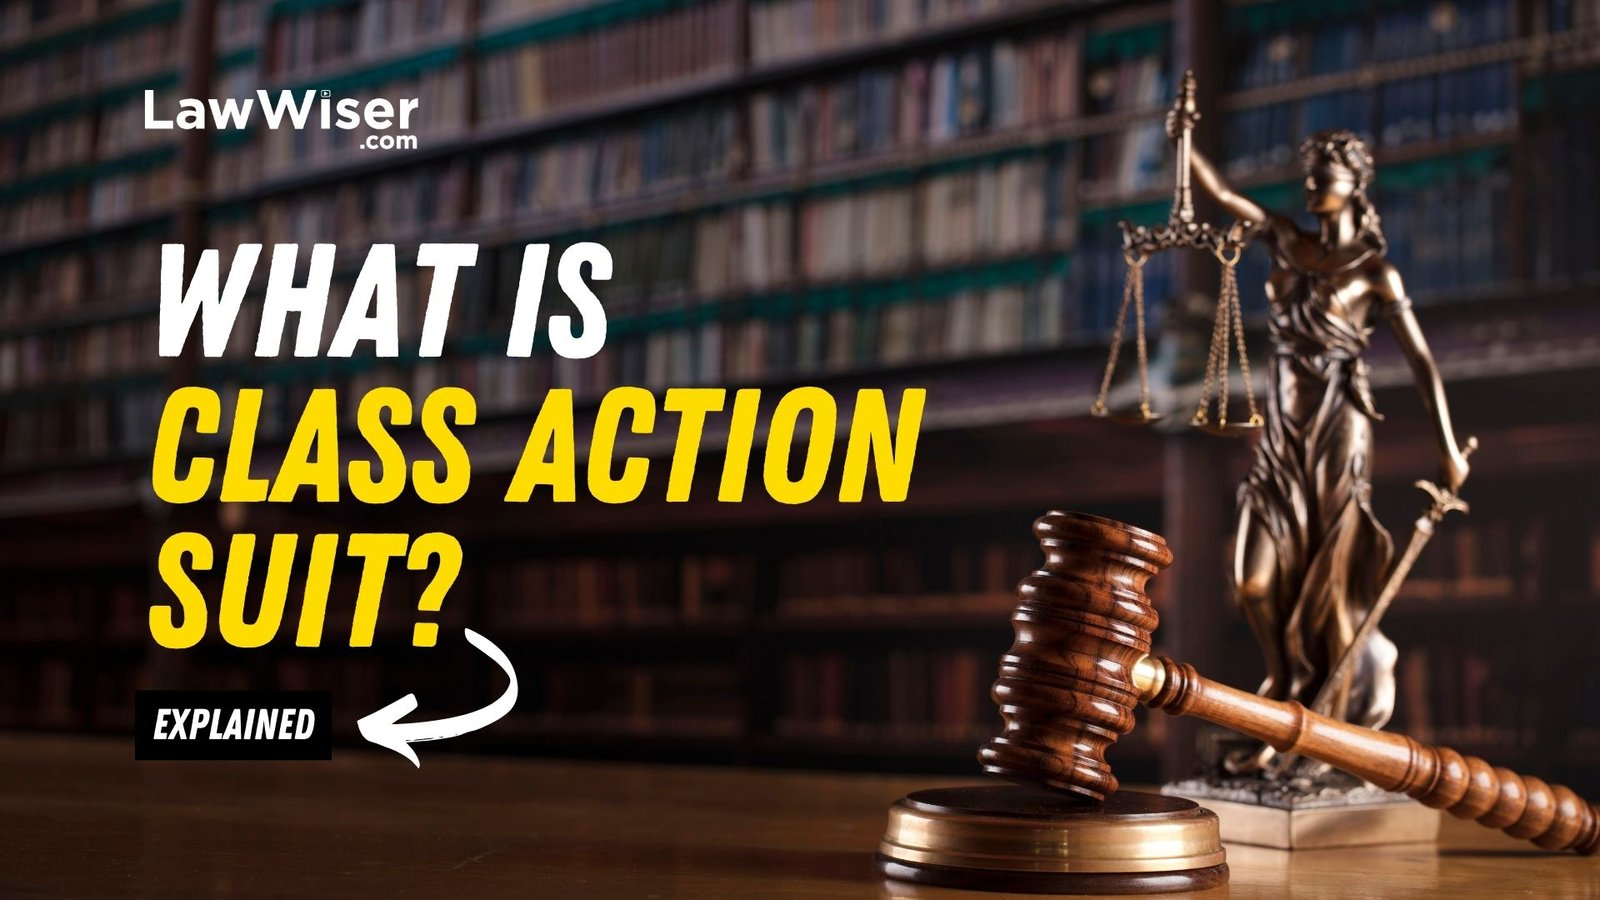 What is a Class Action Suit?